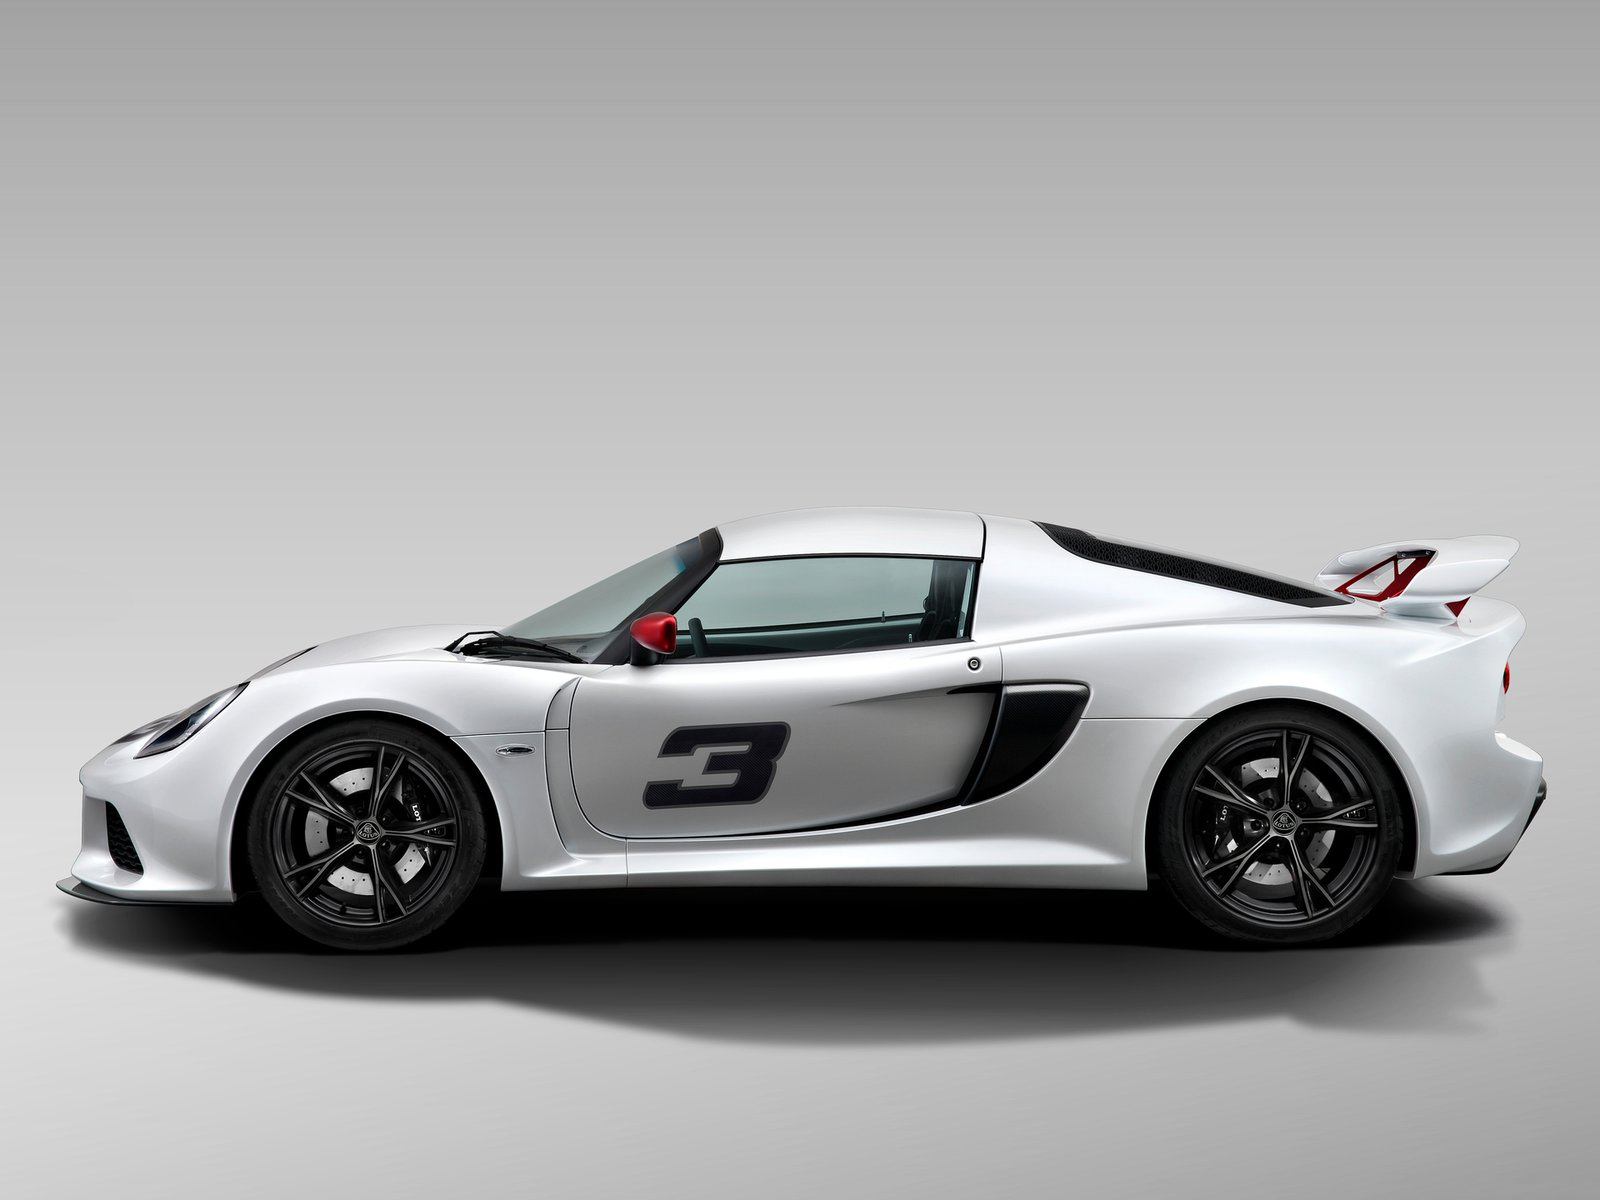 Lotus Exige 'S' On Sale In Malaysia From RM452,000 - DSF